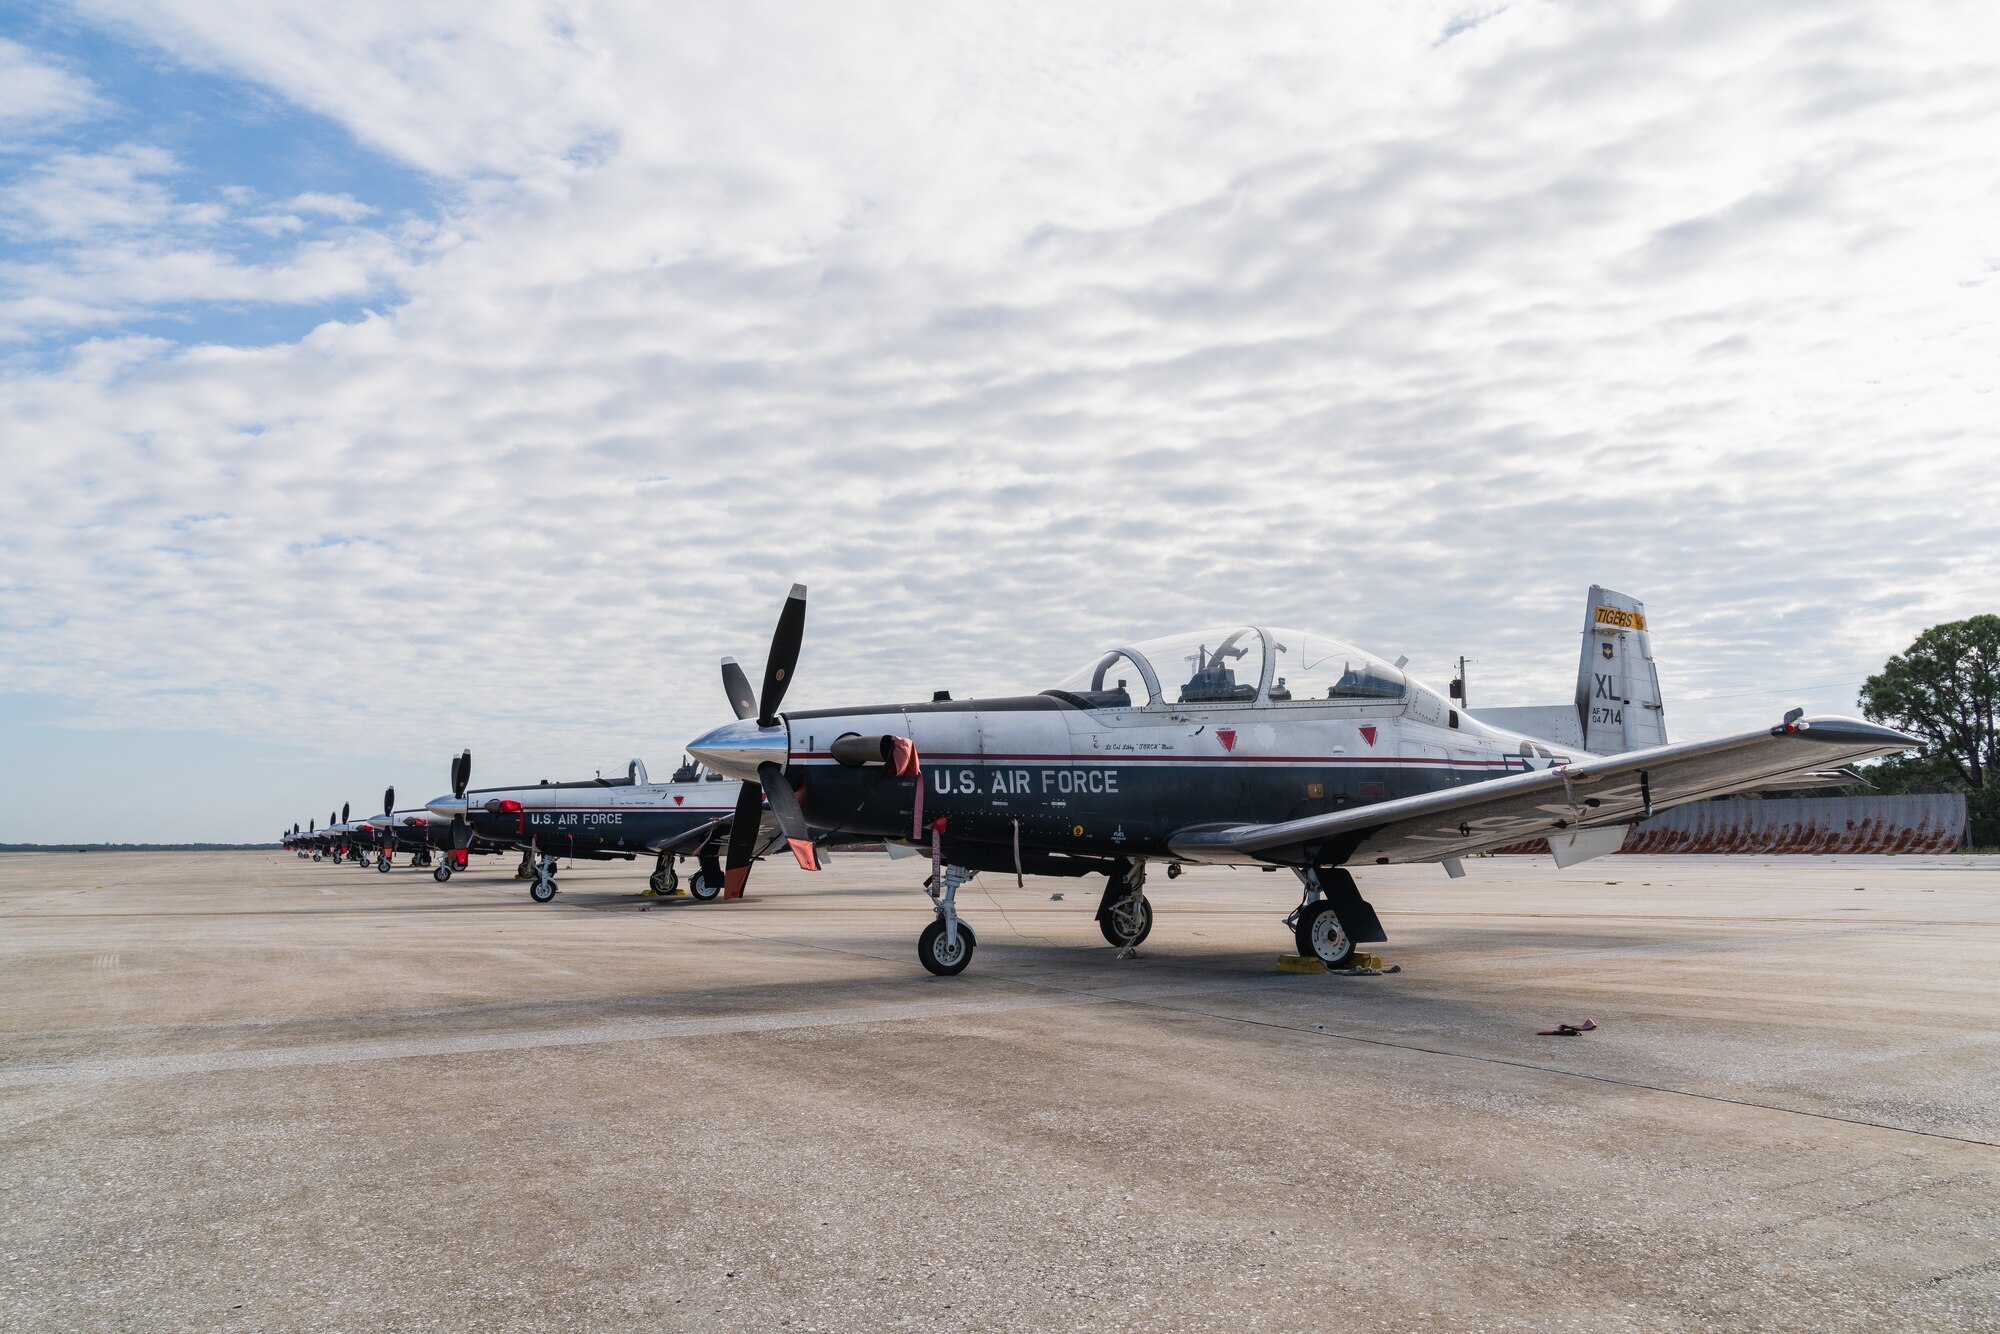 T-6A Texan II aircraft assigned to the 85th Flying Training Squadron are shown on the flight line at MacDill Air Force Base, Florida, Oct. 15, 2022.